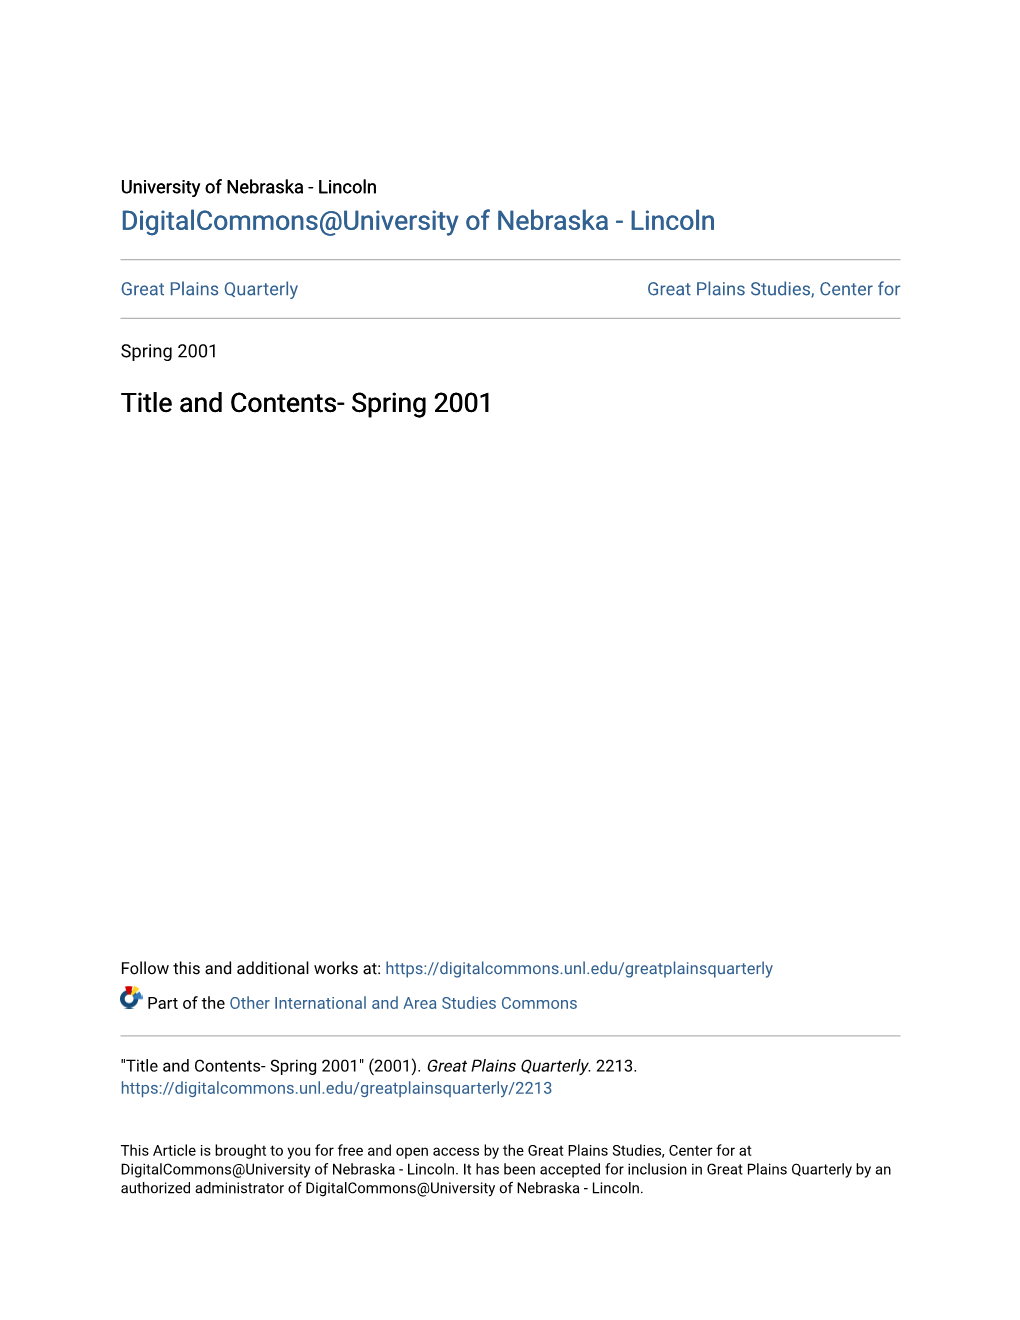 Title and Contents- Spring 2001